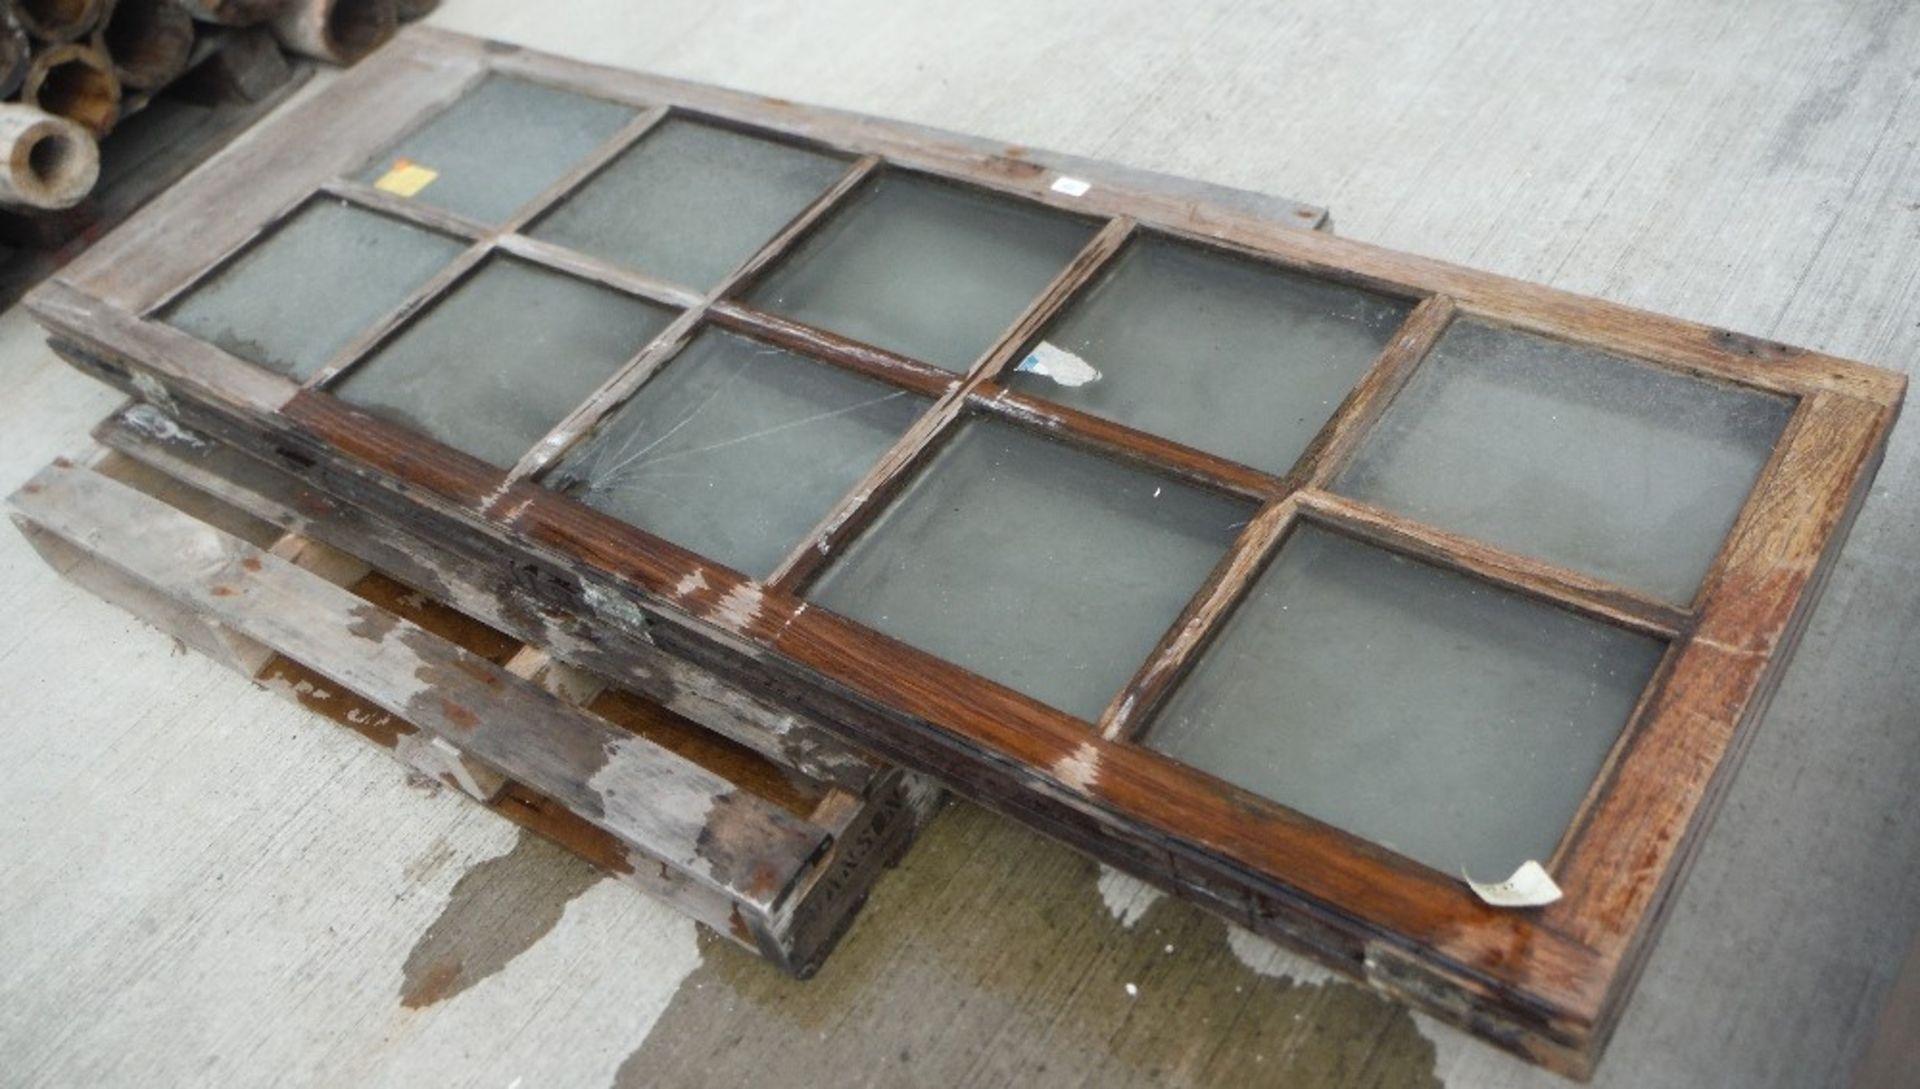 For sale as one lot - approximately twenty reclamation/salvage pine panels and panel doors in